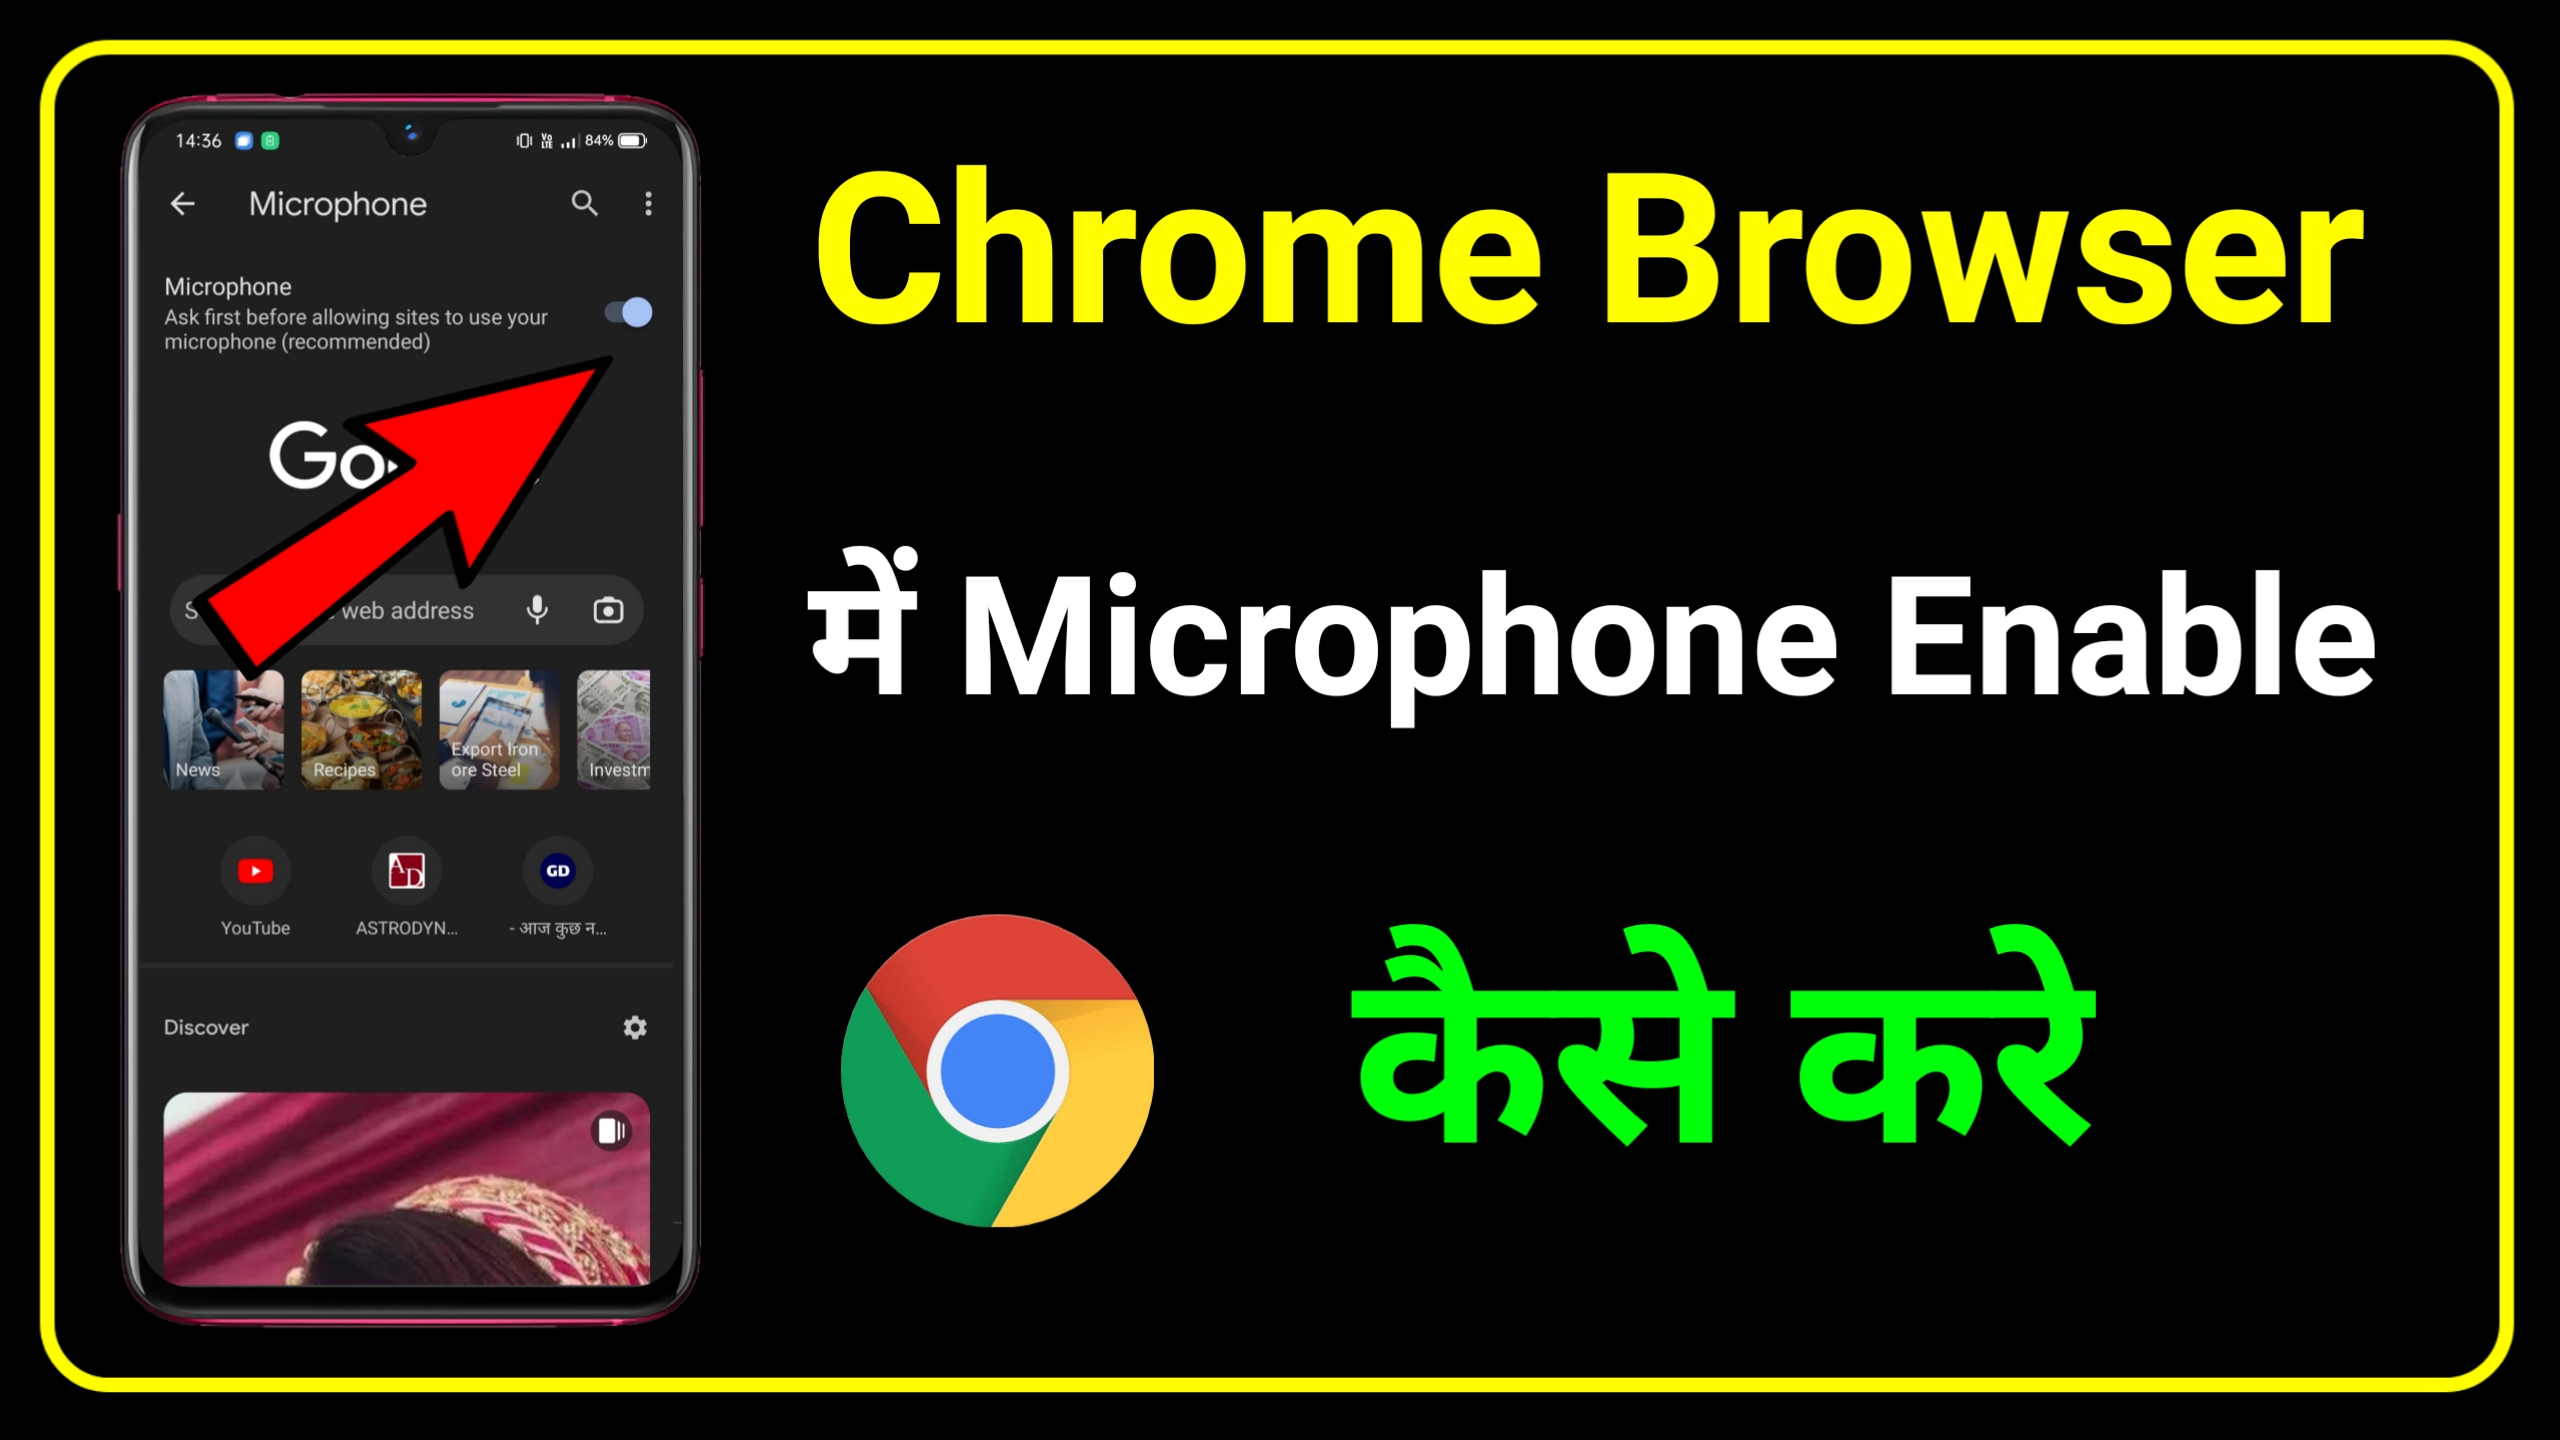 How Enable Microphone in Chrome | Chrome me Microphone Enable kaise kare